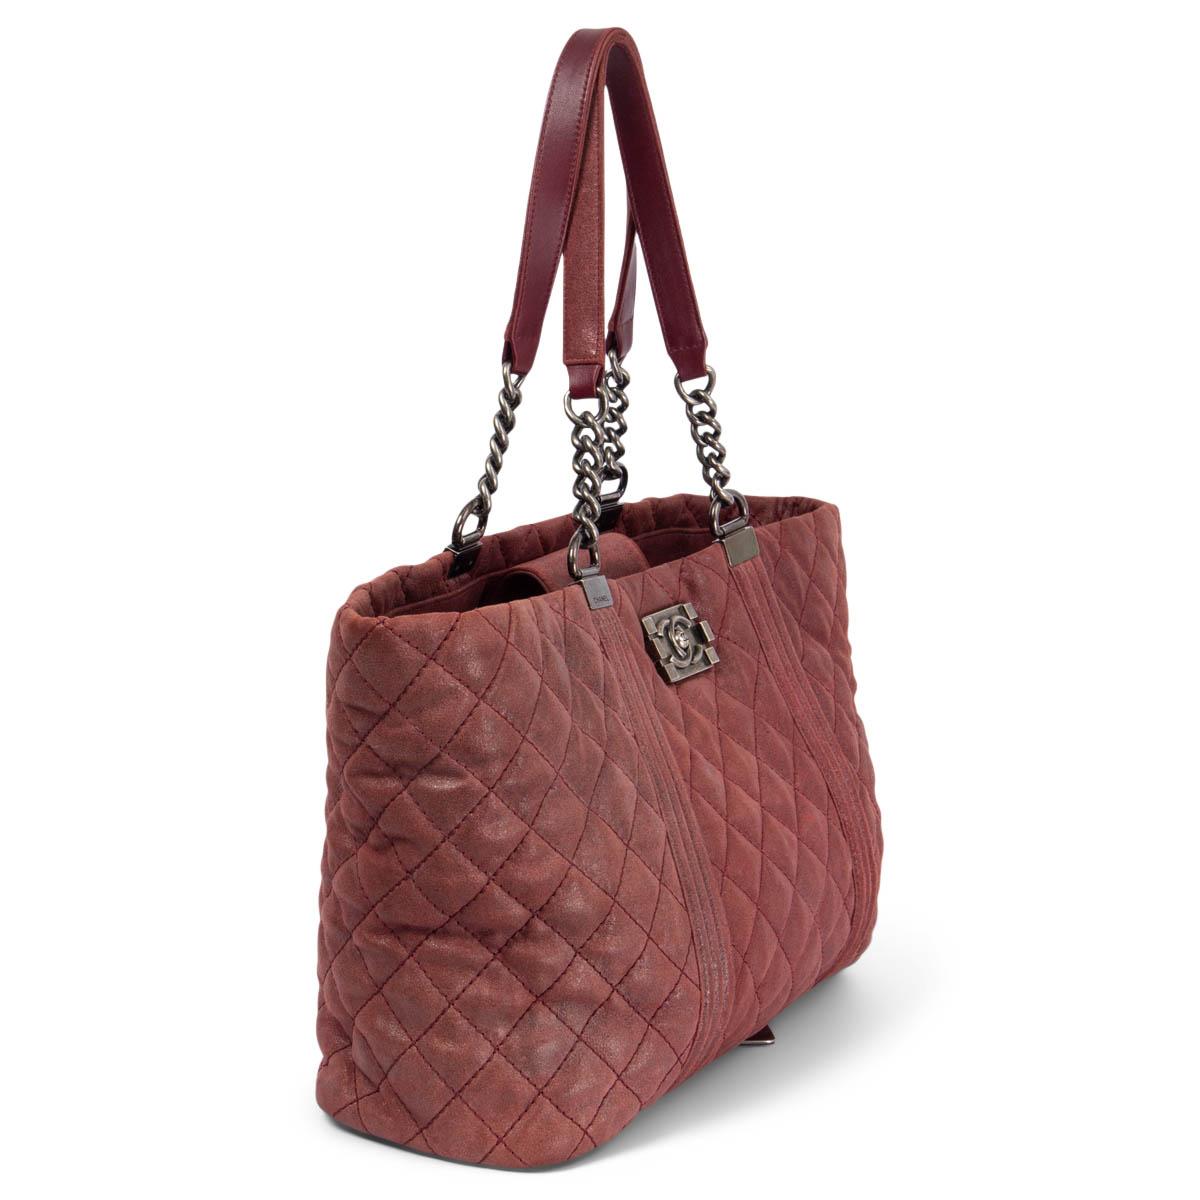 100% authentic Chanel Gentle Boy quilted large shopping tote in distressed shimmery burgundy calfskin. The bag features ruthenium chain link strap handles with leather shoulder pads and a ruthenium Chanel CC press lock. Opens the top to a burgundy